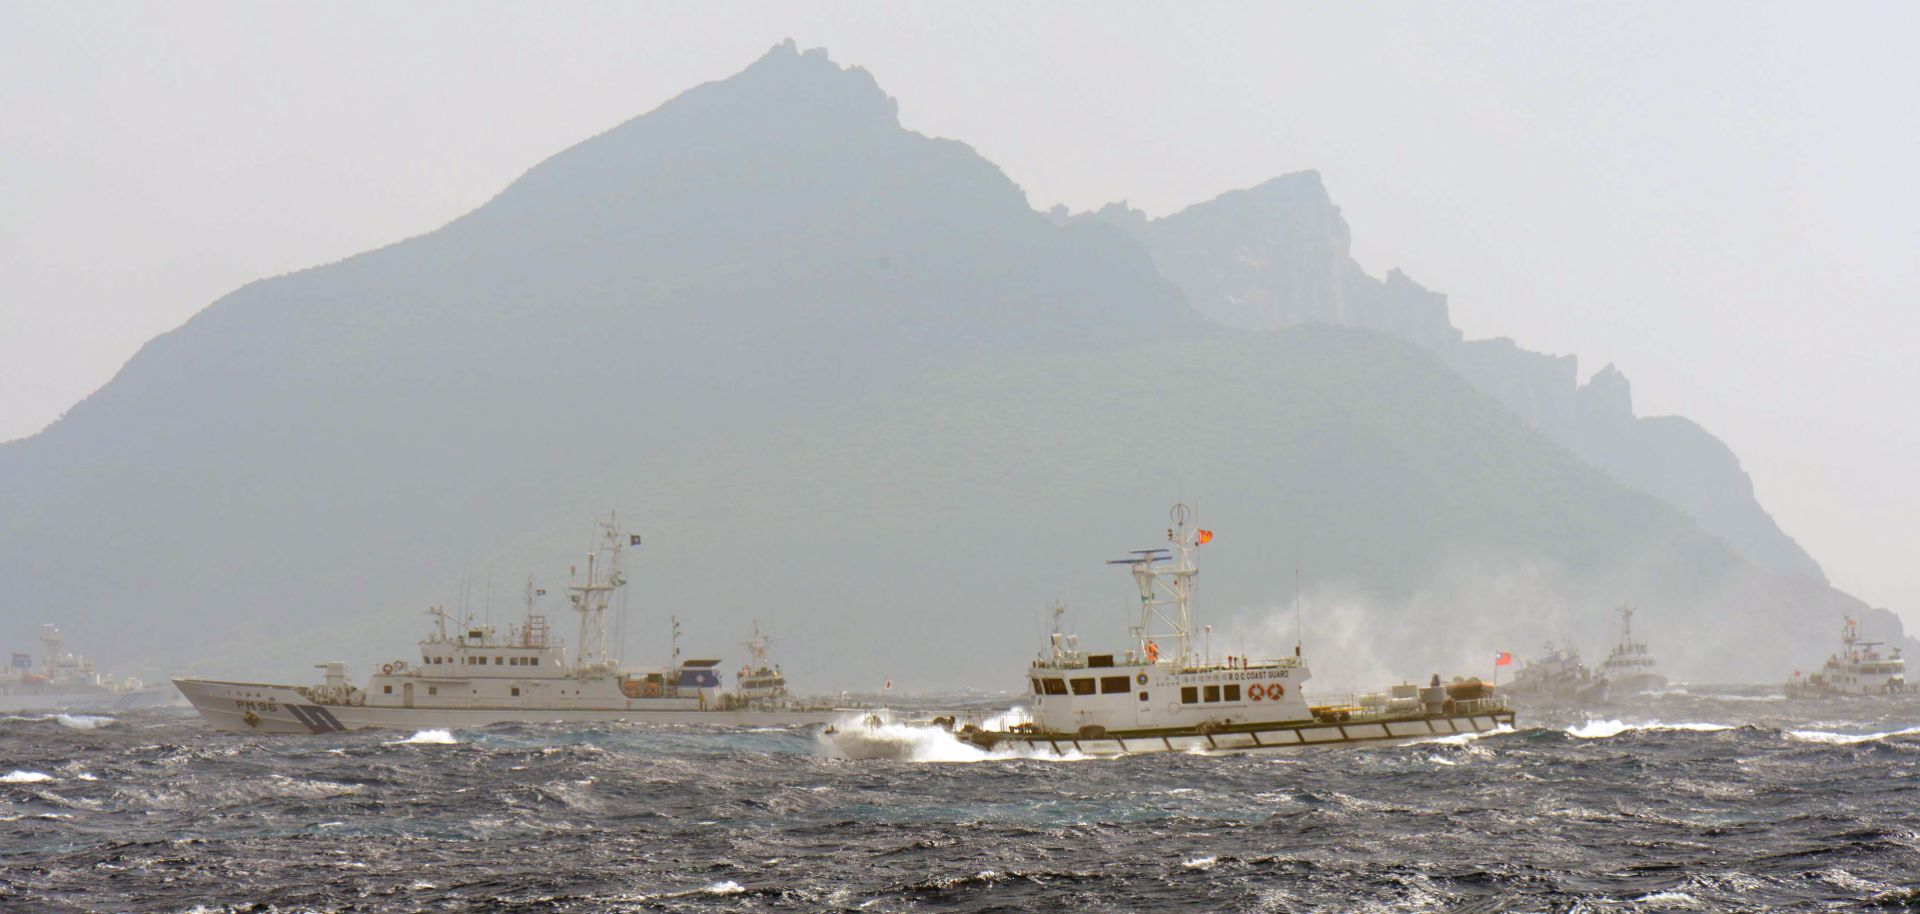 A Taiwan Coast Guard boat (R-with red flag) is blocked by a Japan Coast Guard vessel (L) in the waters near the disputed Diaoyu / Senkaku islands in the East China Sea on September 25, 2012. 